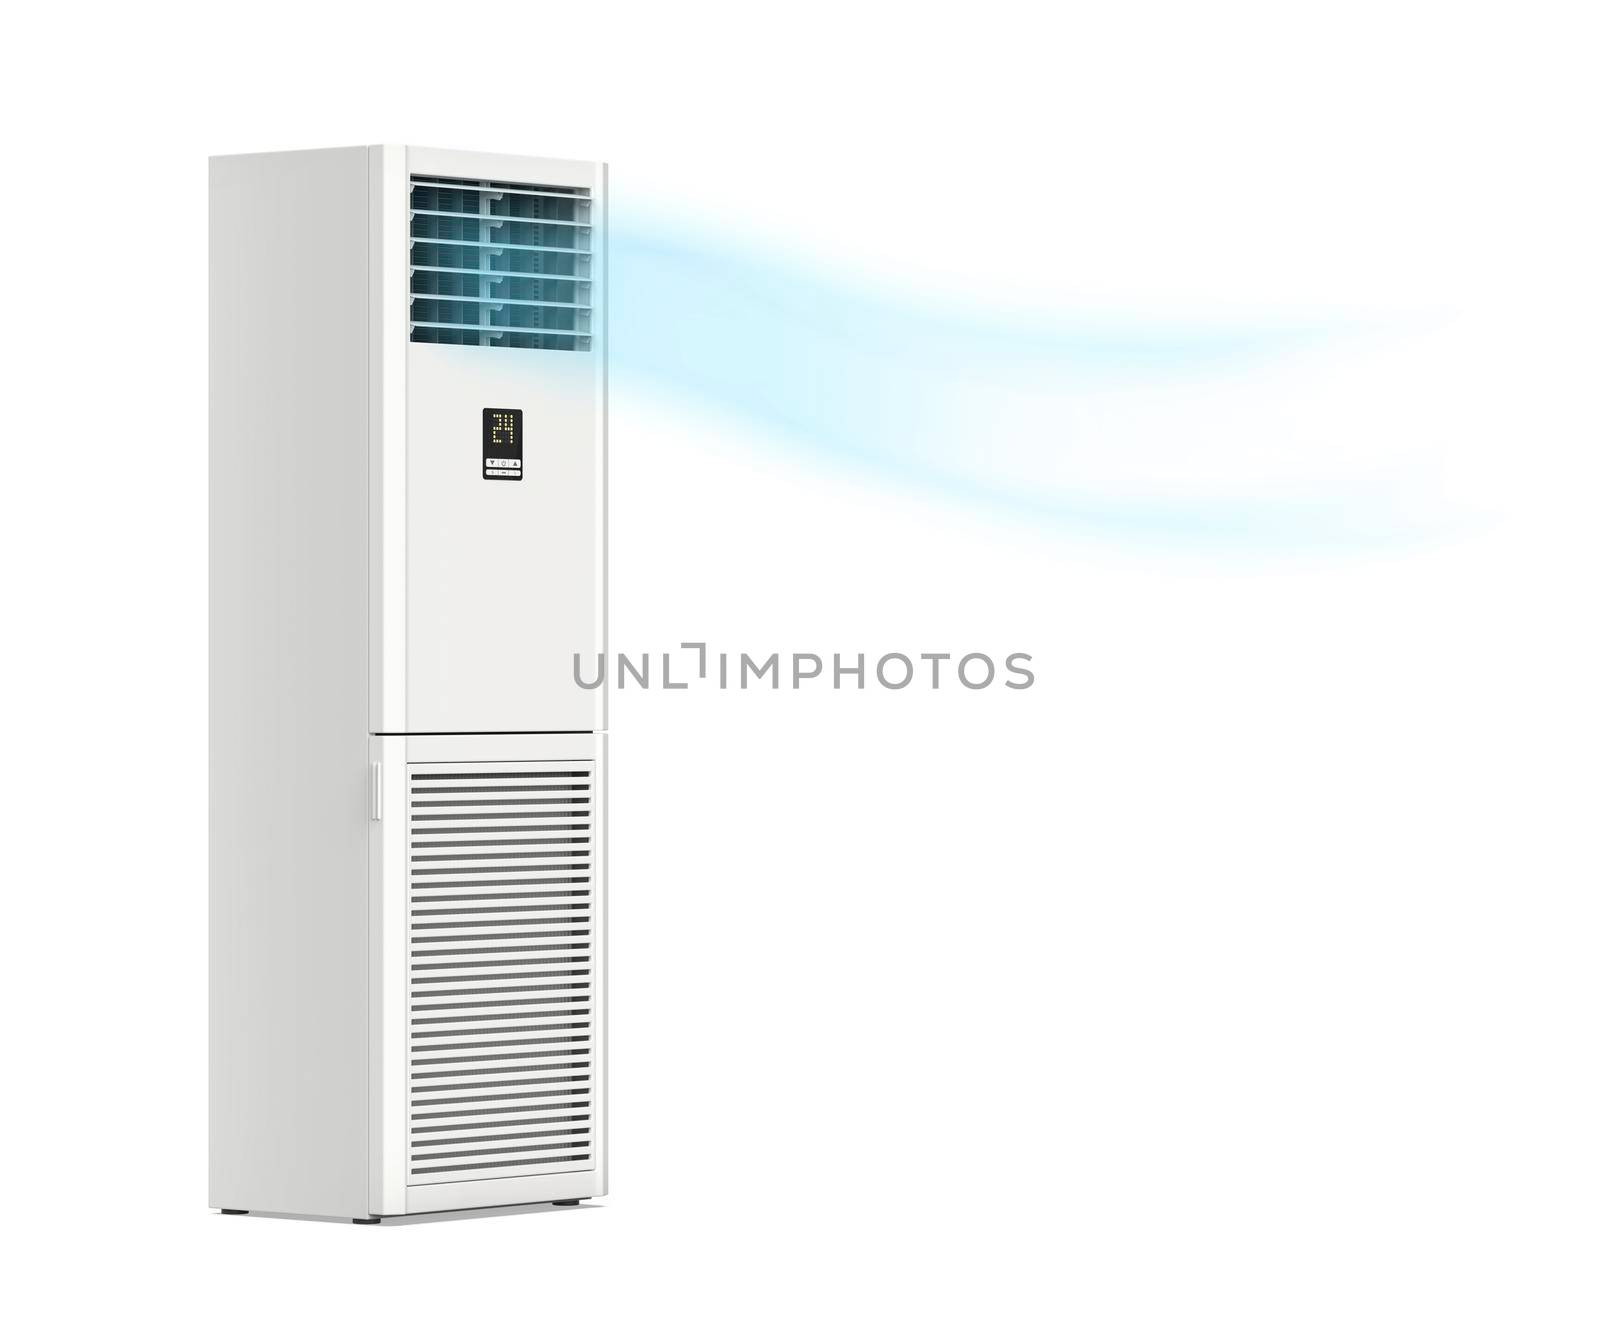 Big floor standing air conditioner blowing cold air